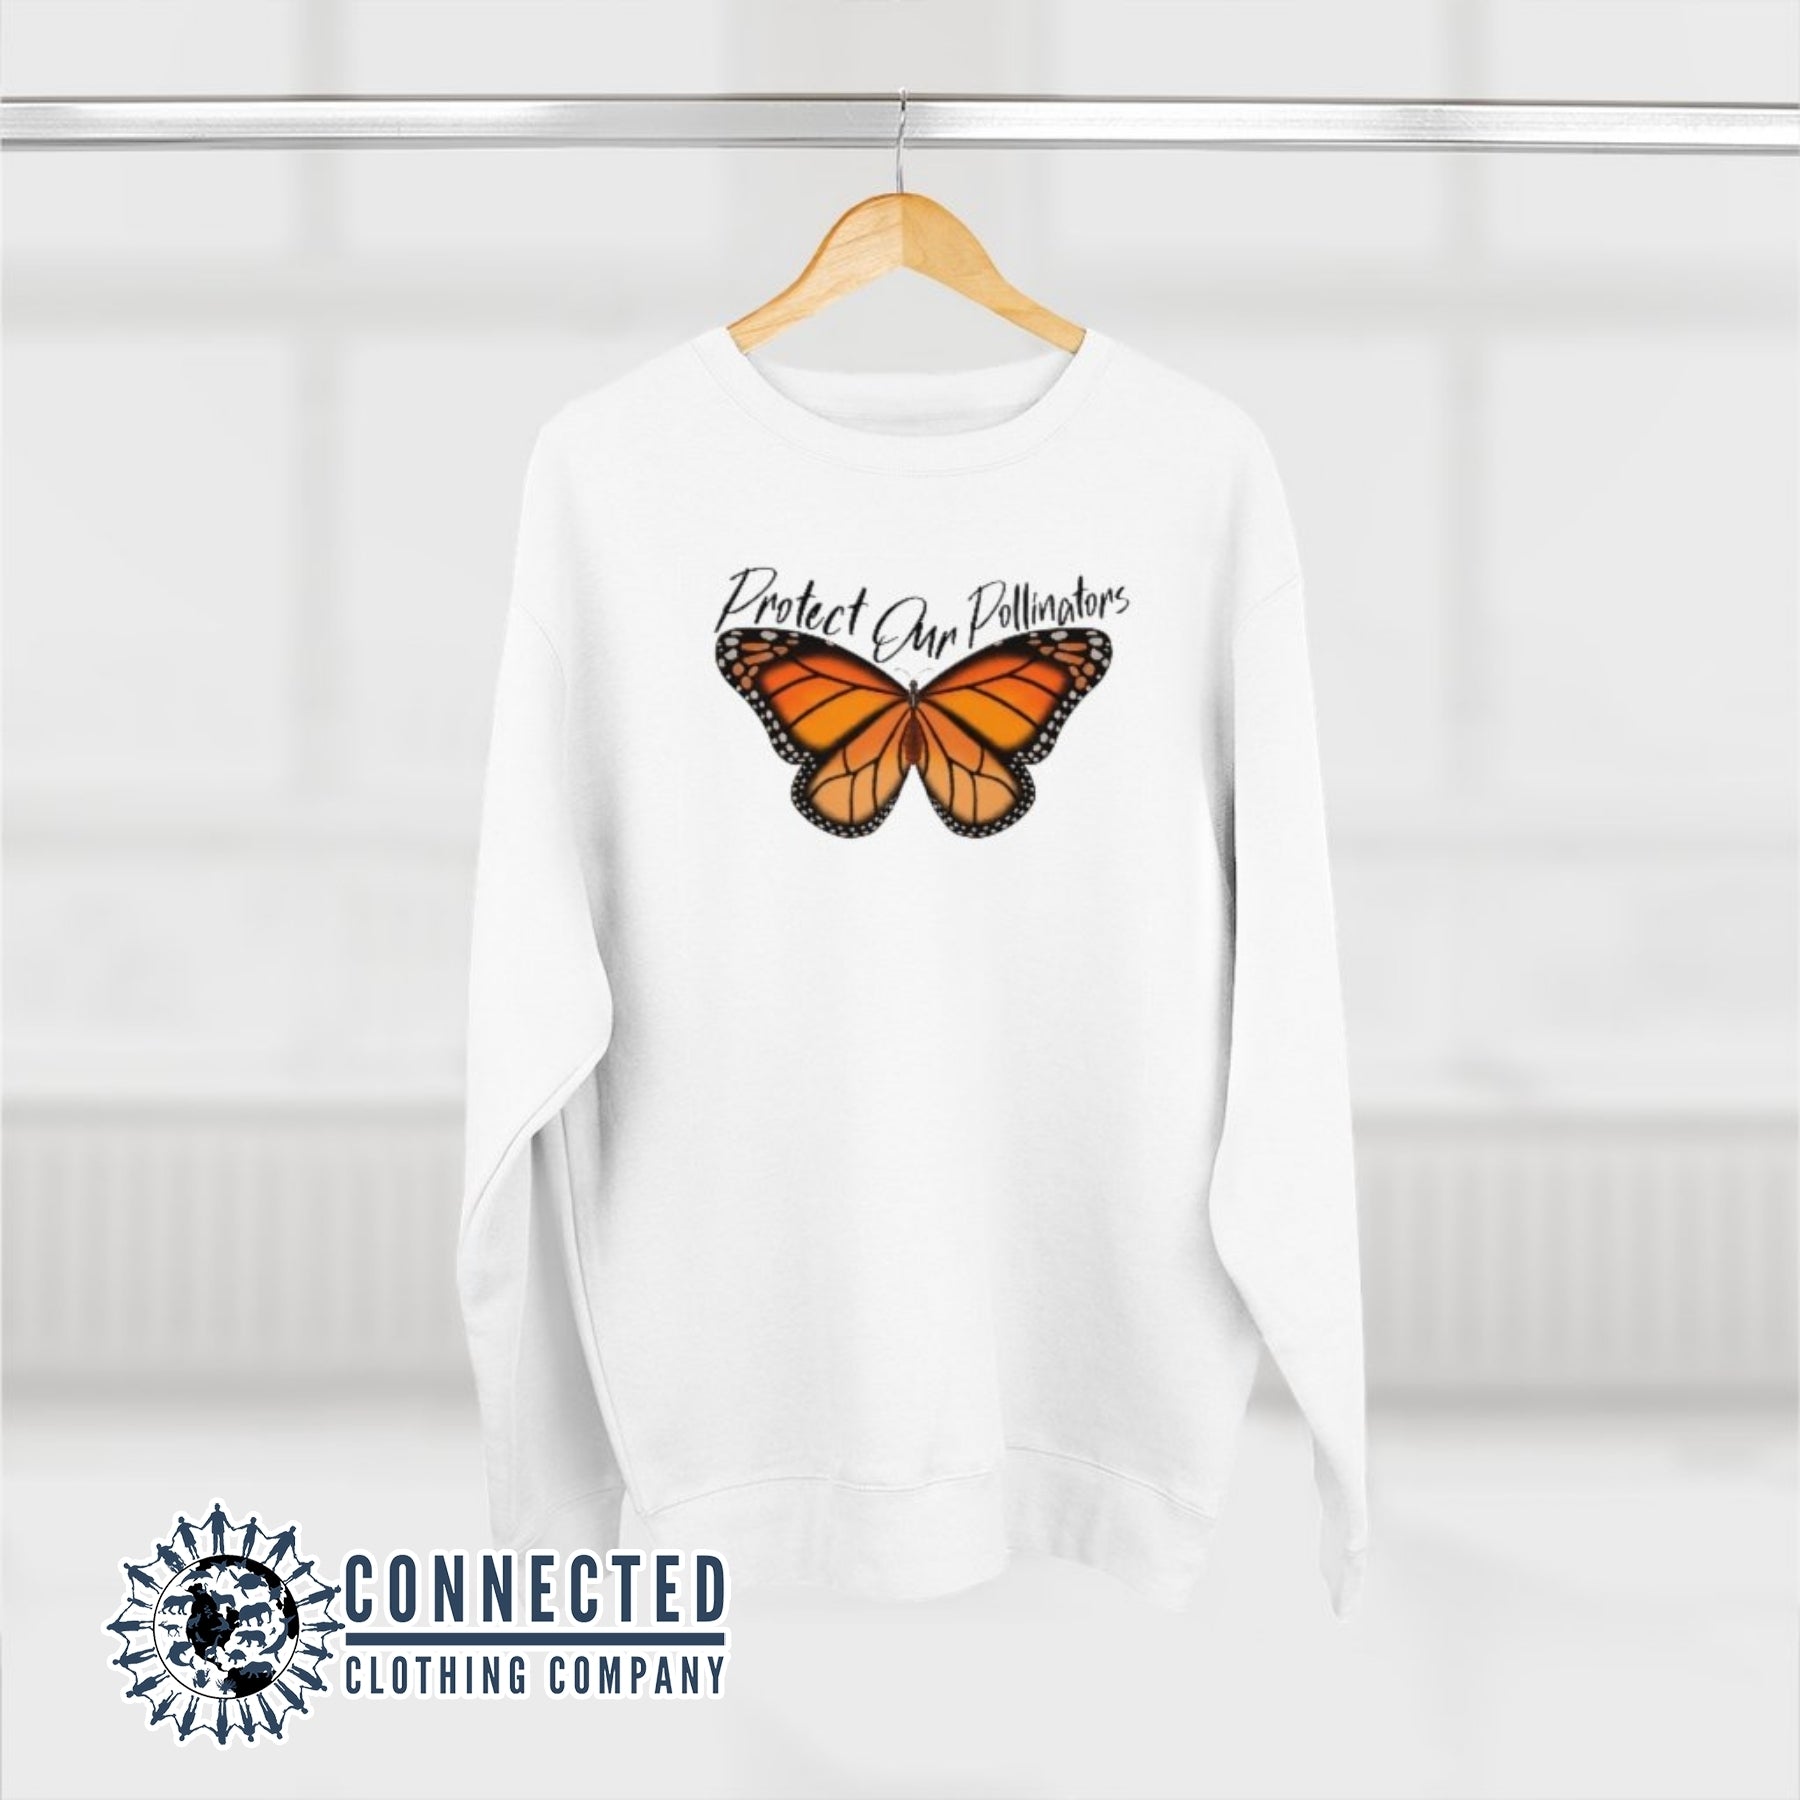 Hanging White Protect Our Pollinators Crewneck Sweatshirt - Connected Clothing Company - Ethically and Sustainably Made - 10% of profits donated to pollinator and monarch conservation and ocean conservation